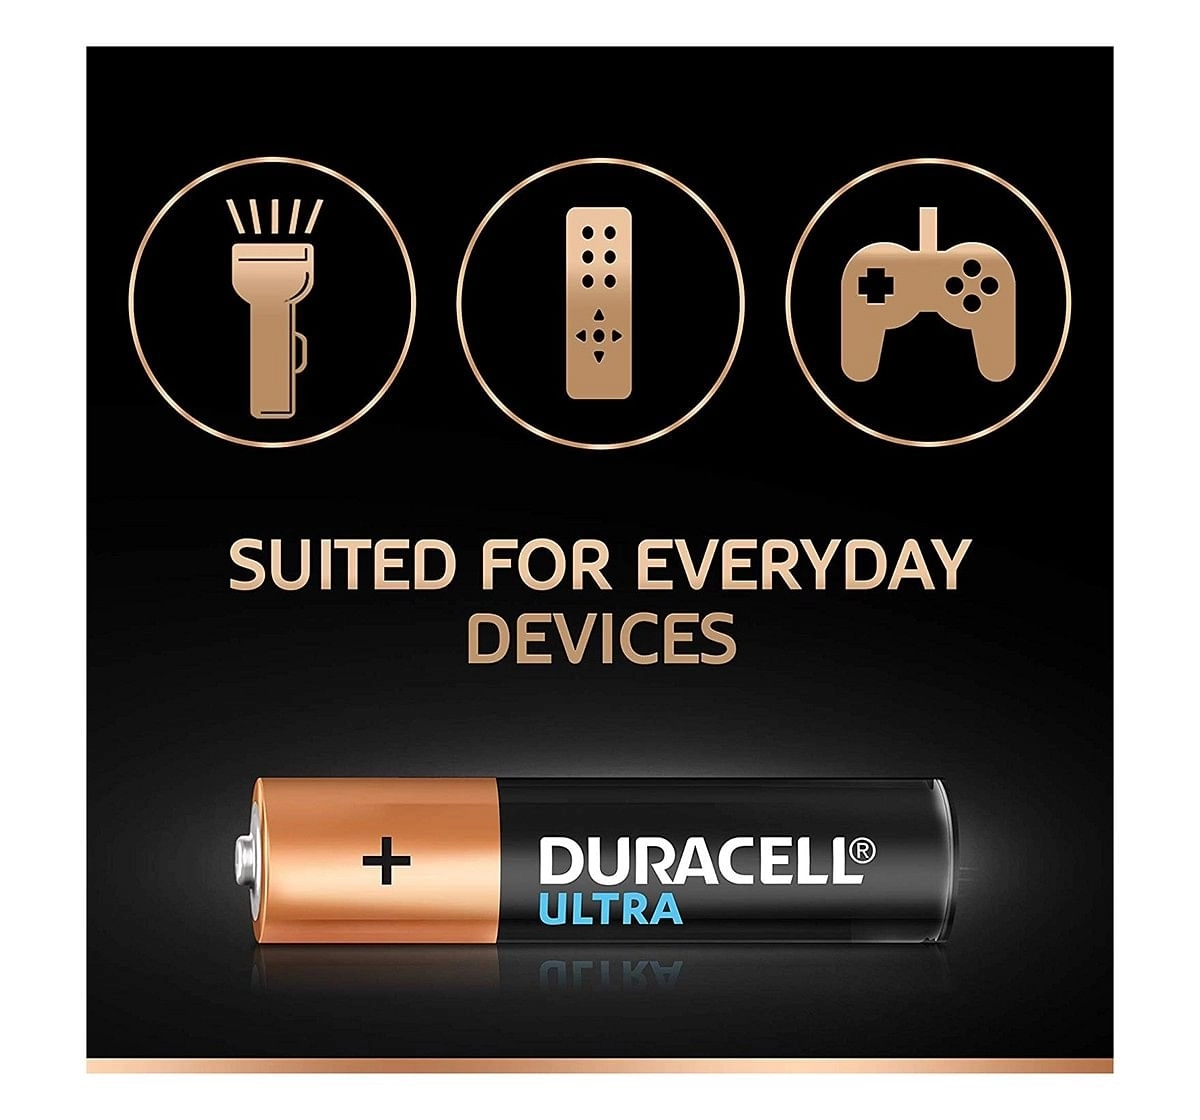 Duracell Alkaline AAA Batteries - Pack of 4 Essentials for Kids age 3Y+ 